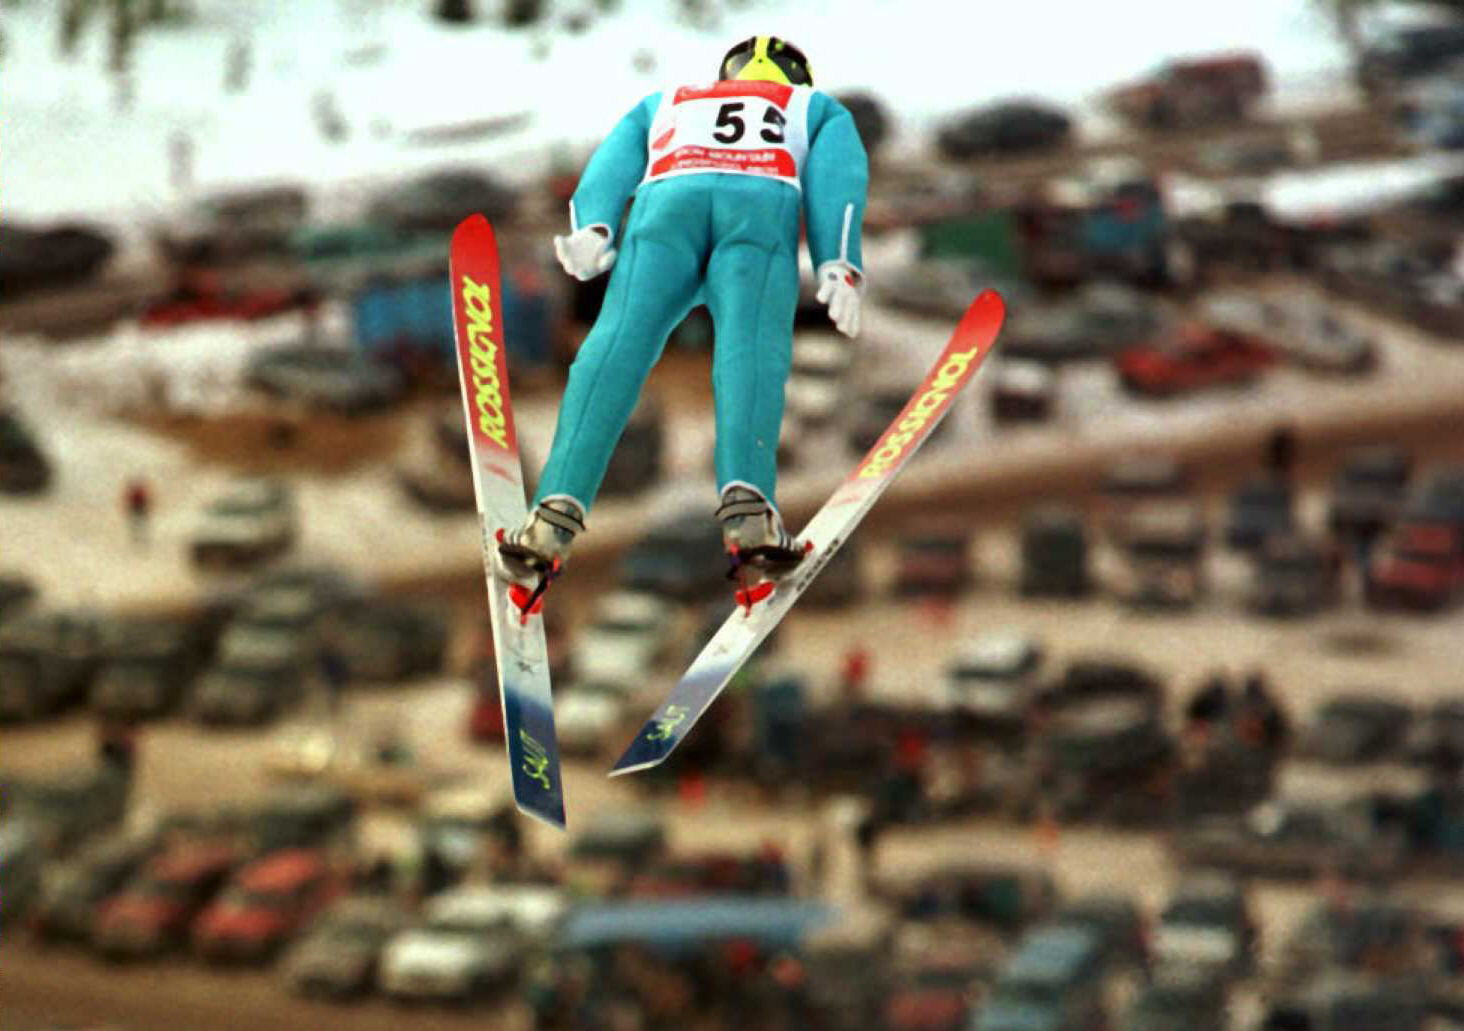 Iron Mountain's return to FIS Ski Jumping World Cup circuit cancelled